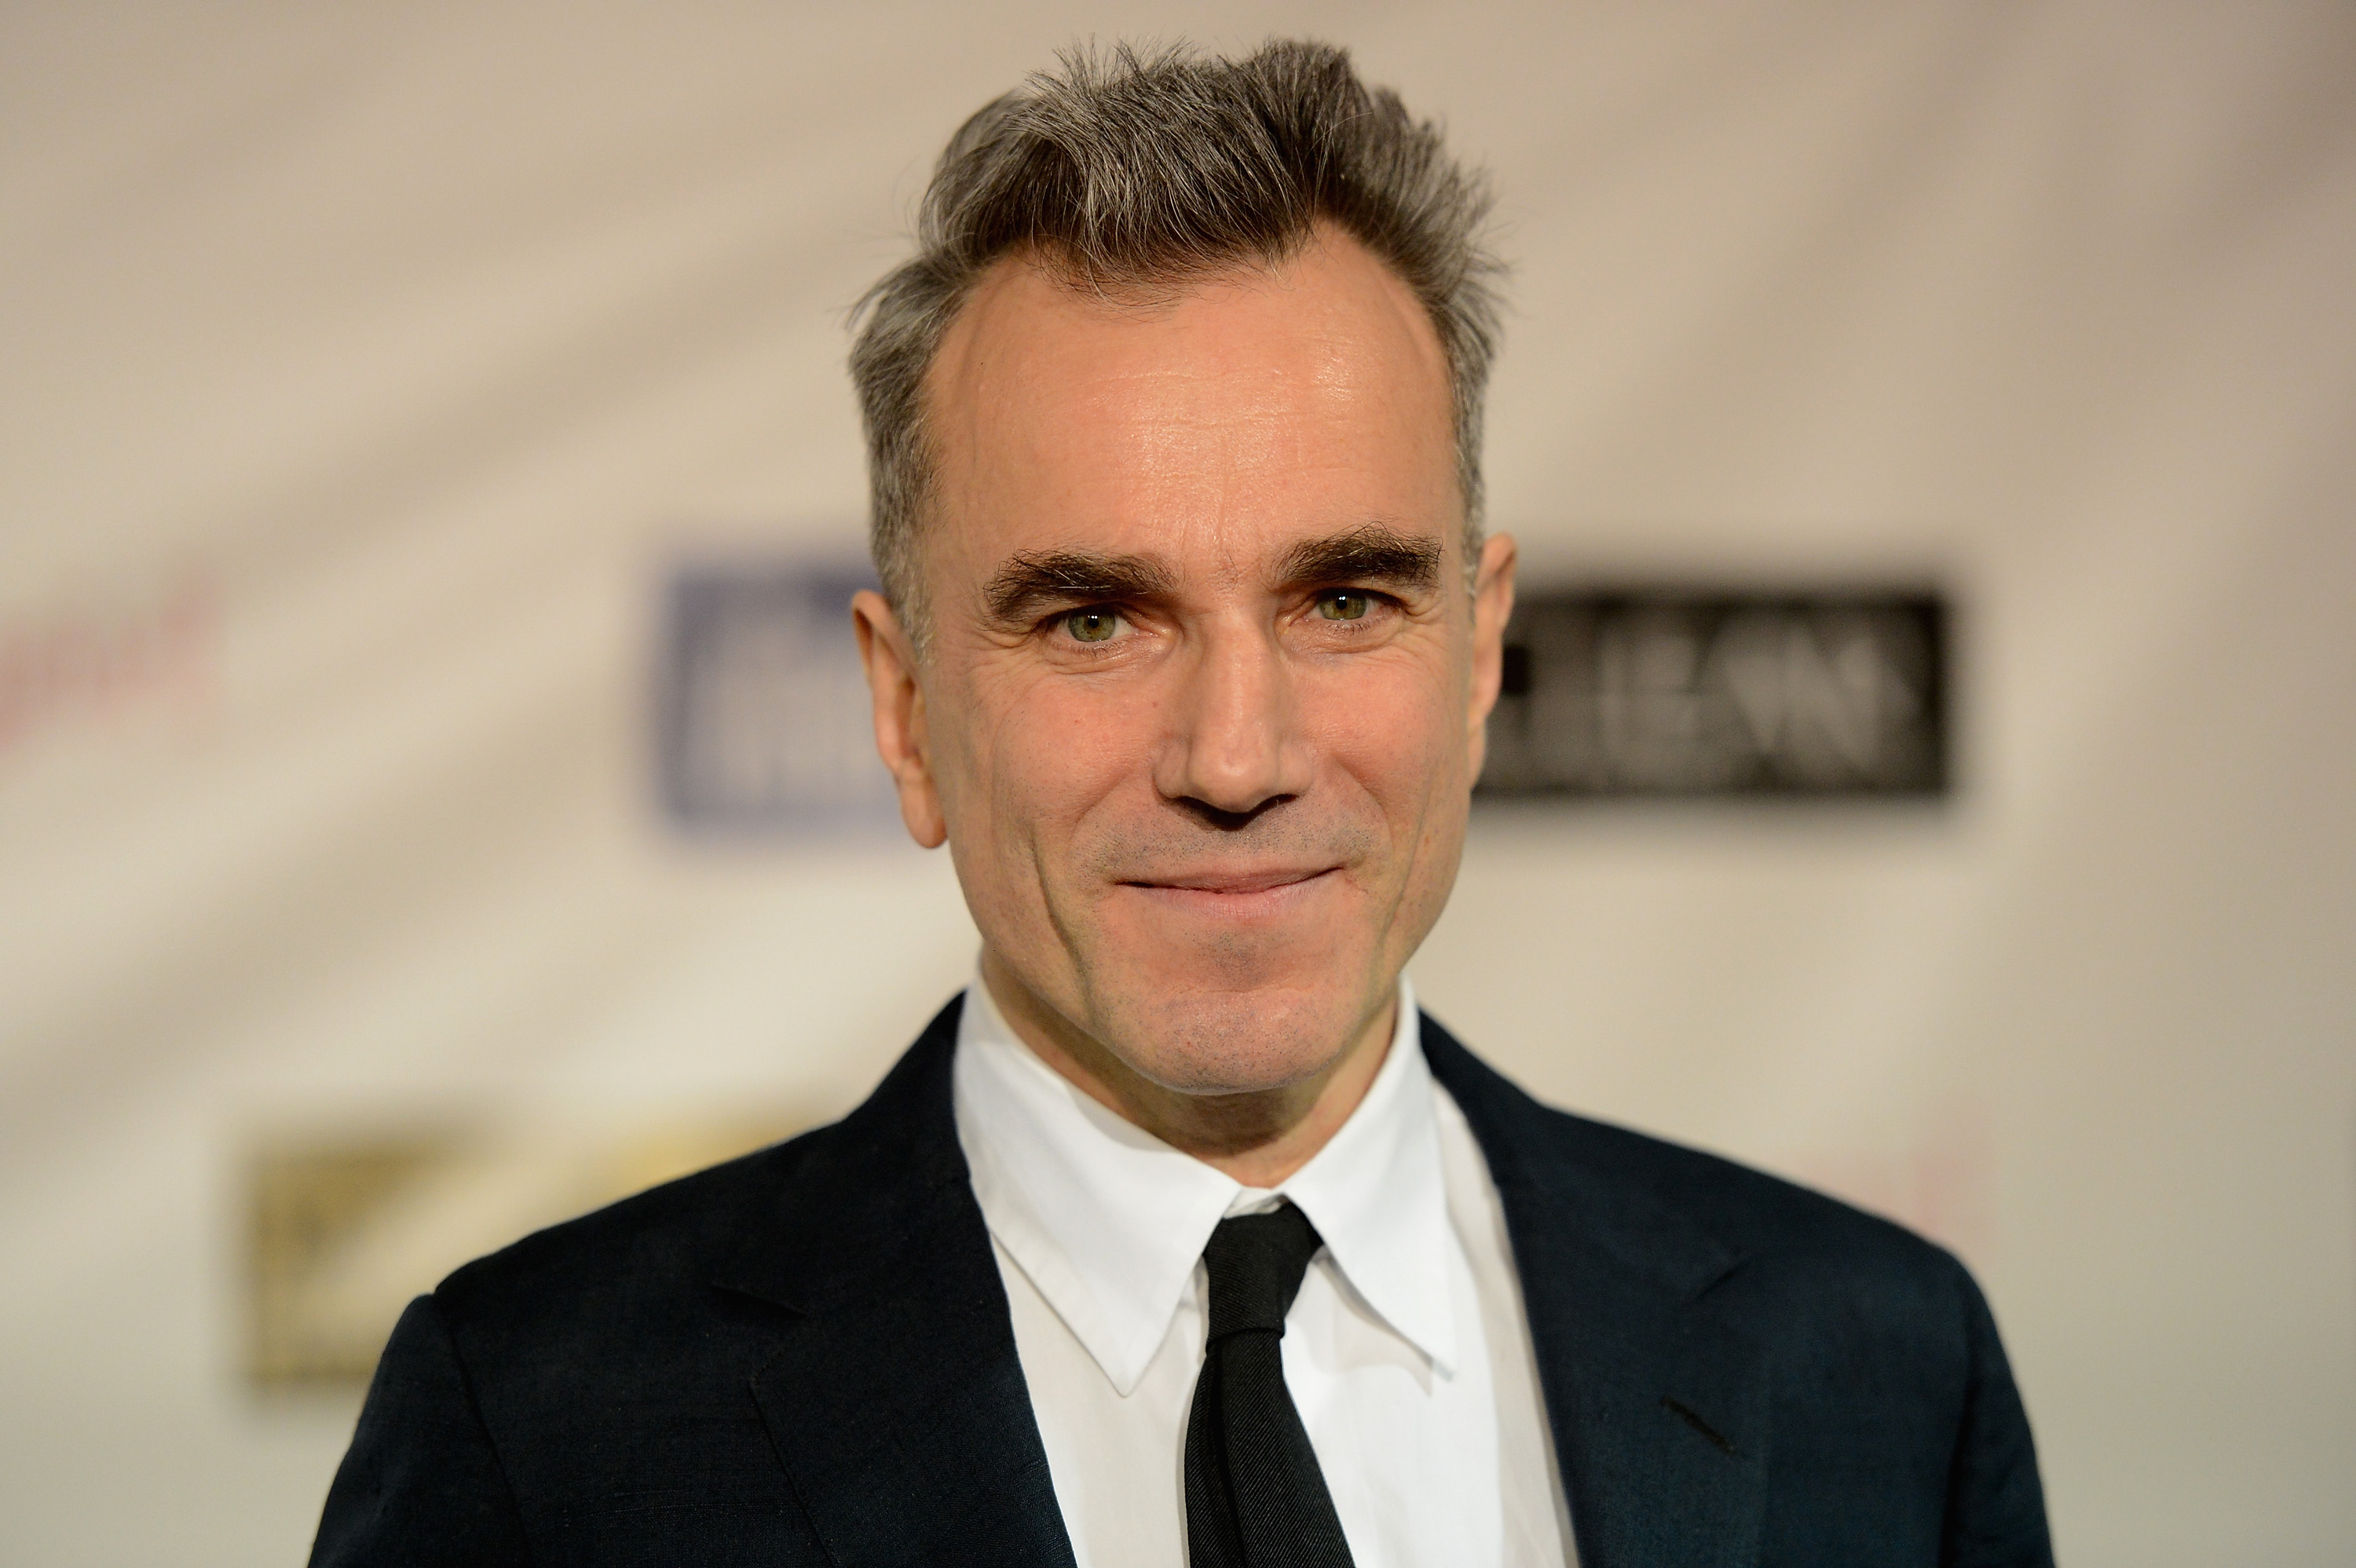 Daniel day lewis photos hd images photo gallery wallpapers